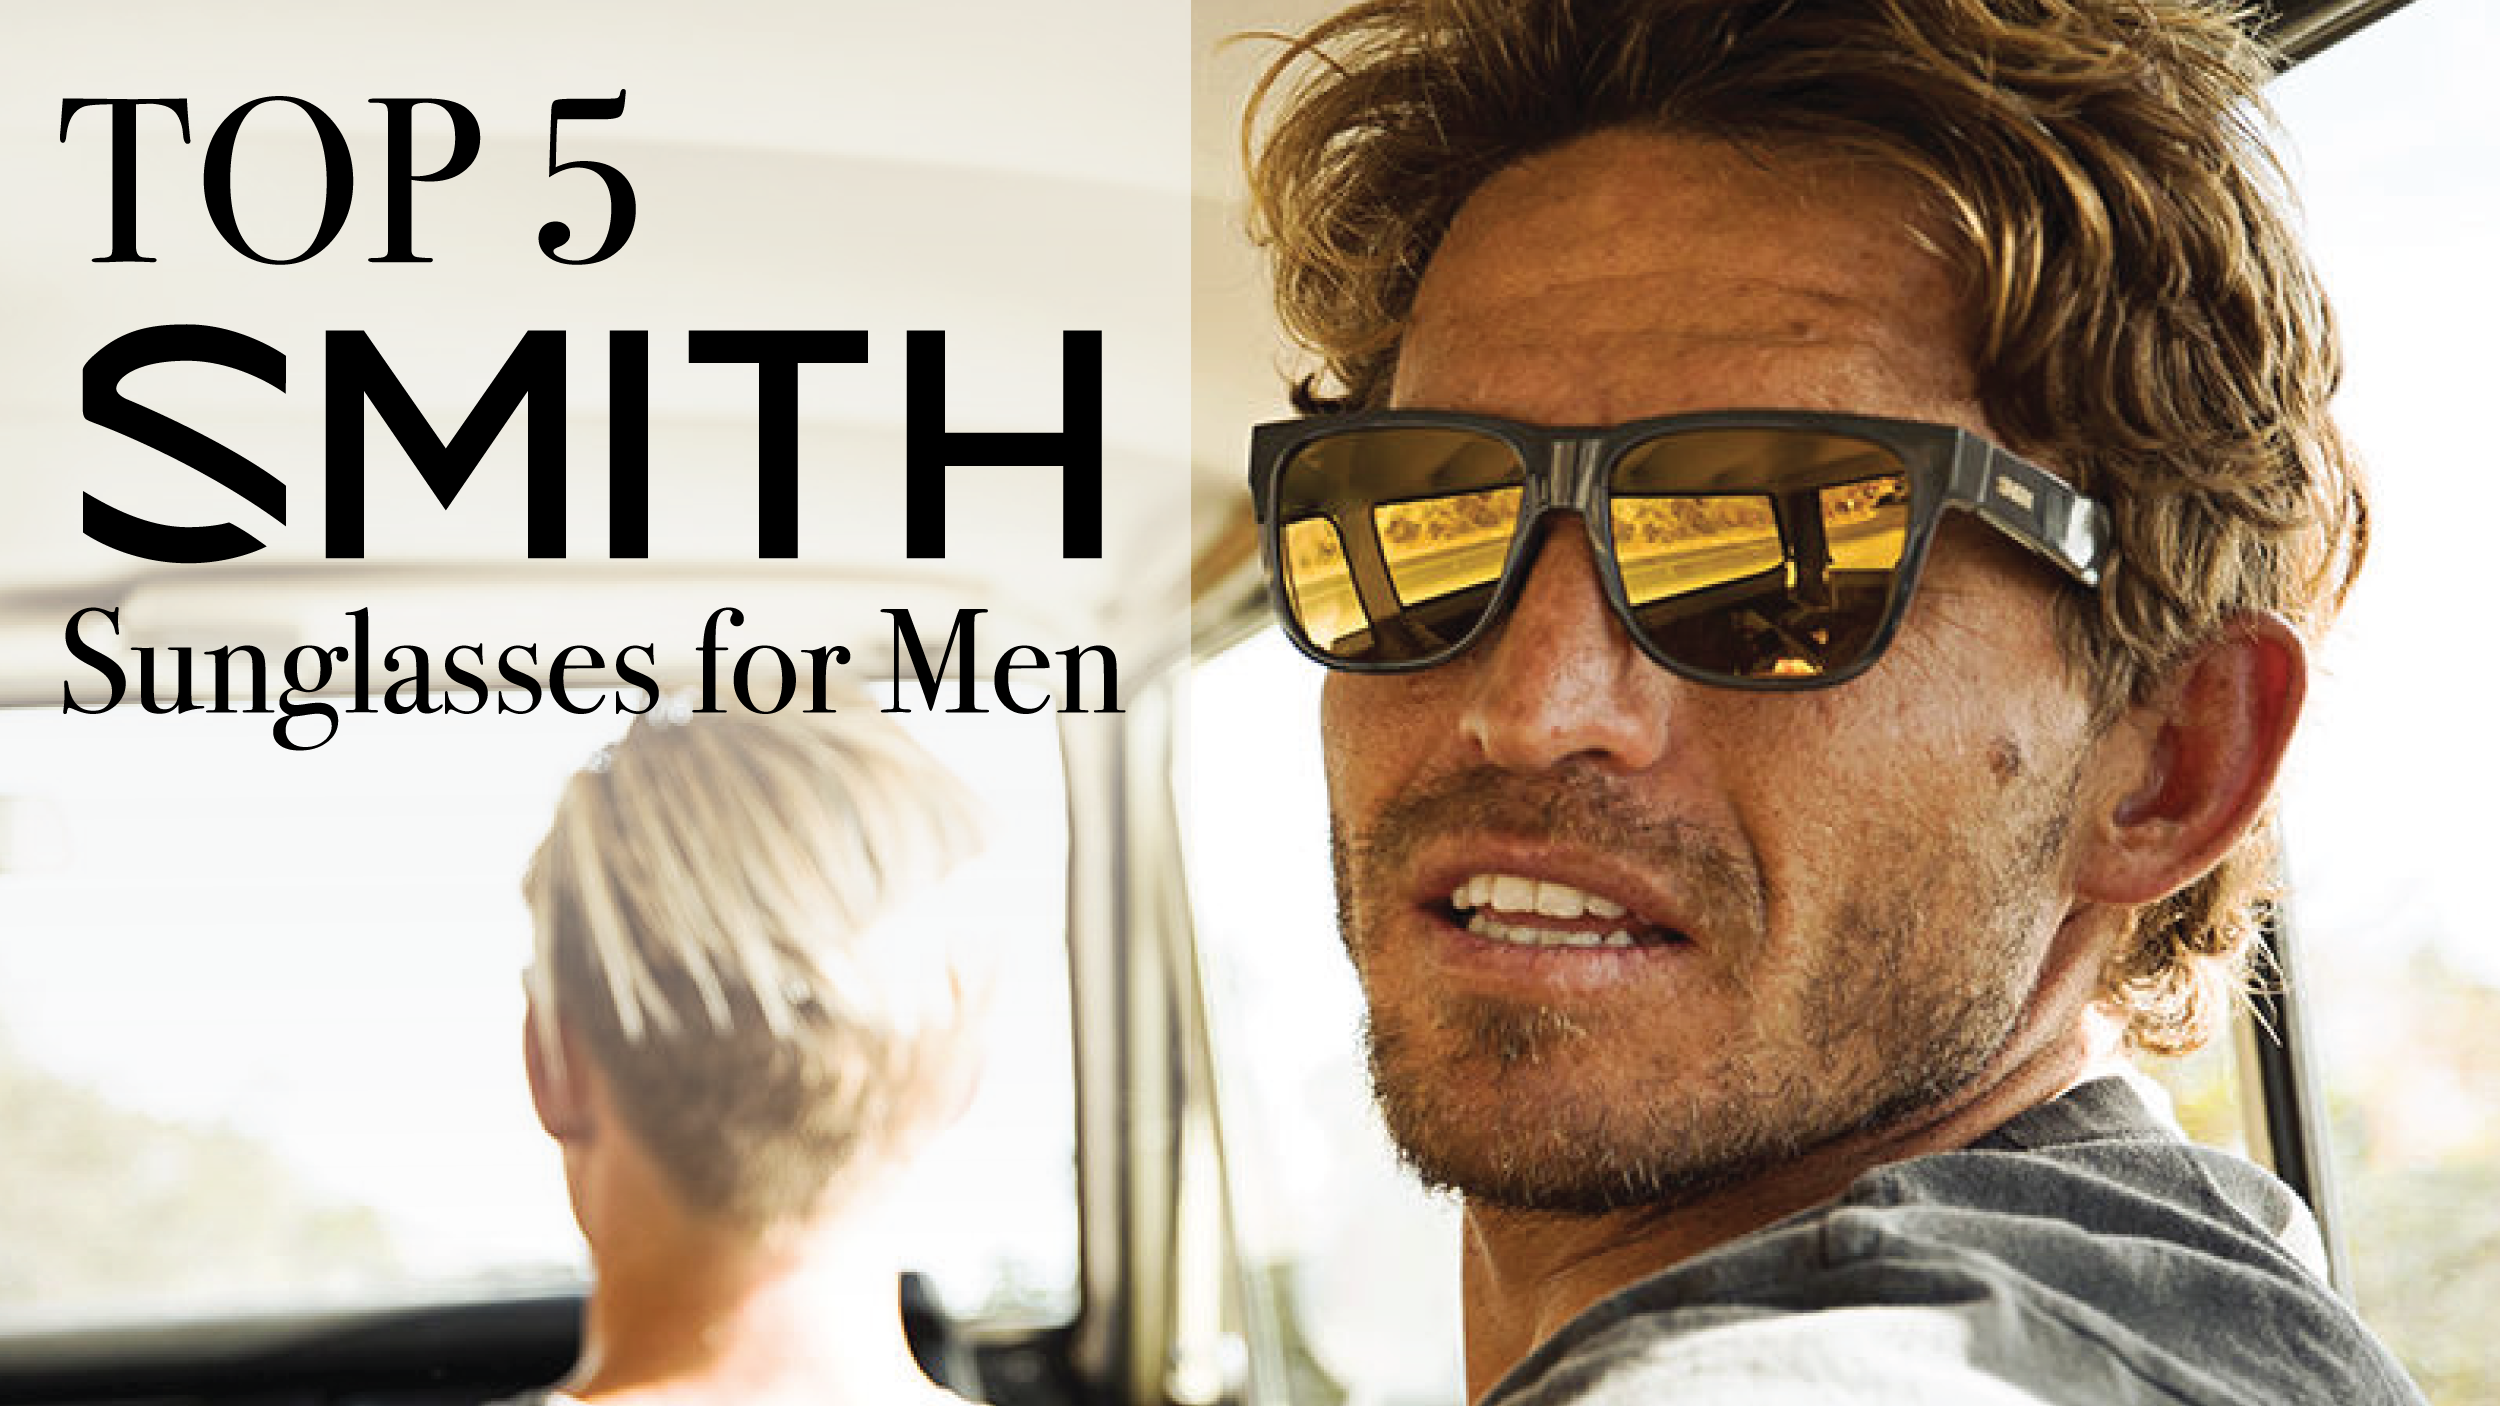 The Top 5 Smith Sunglasses for Men Header